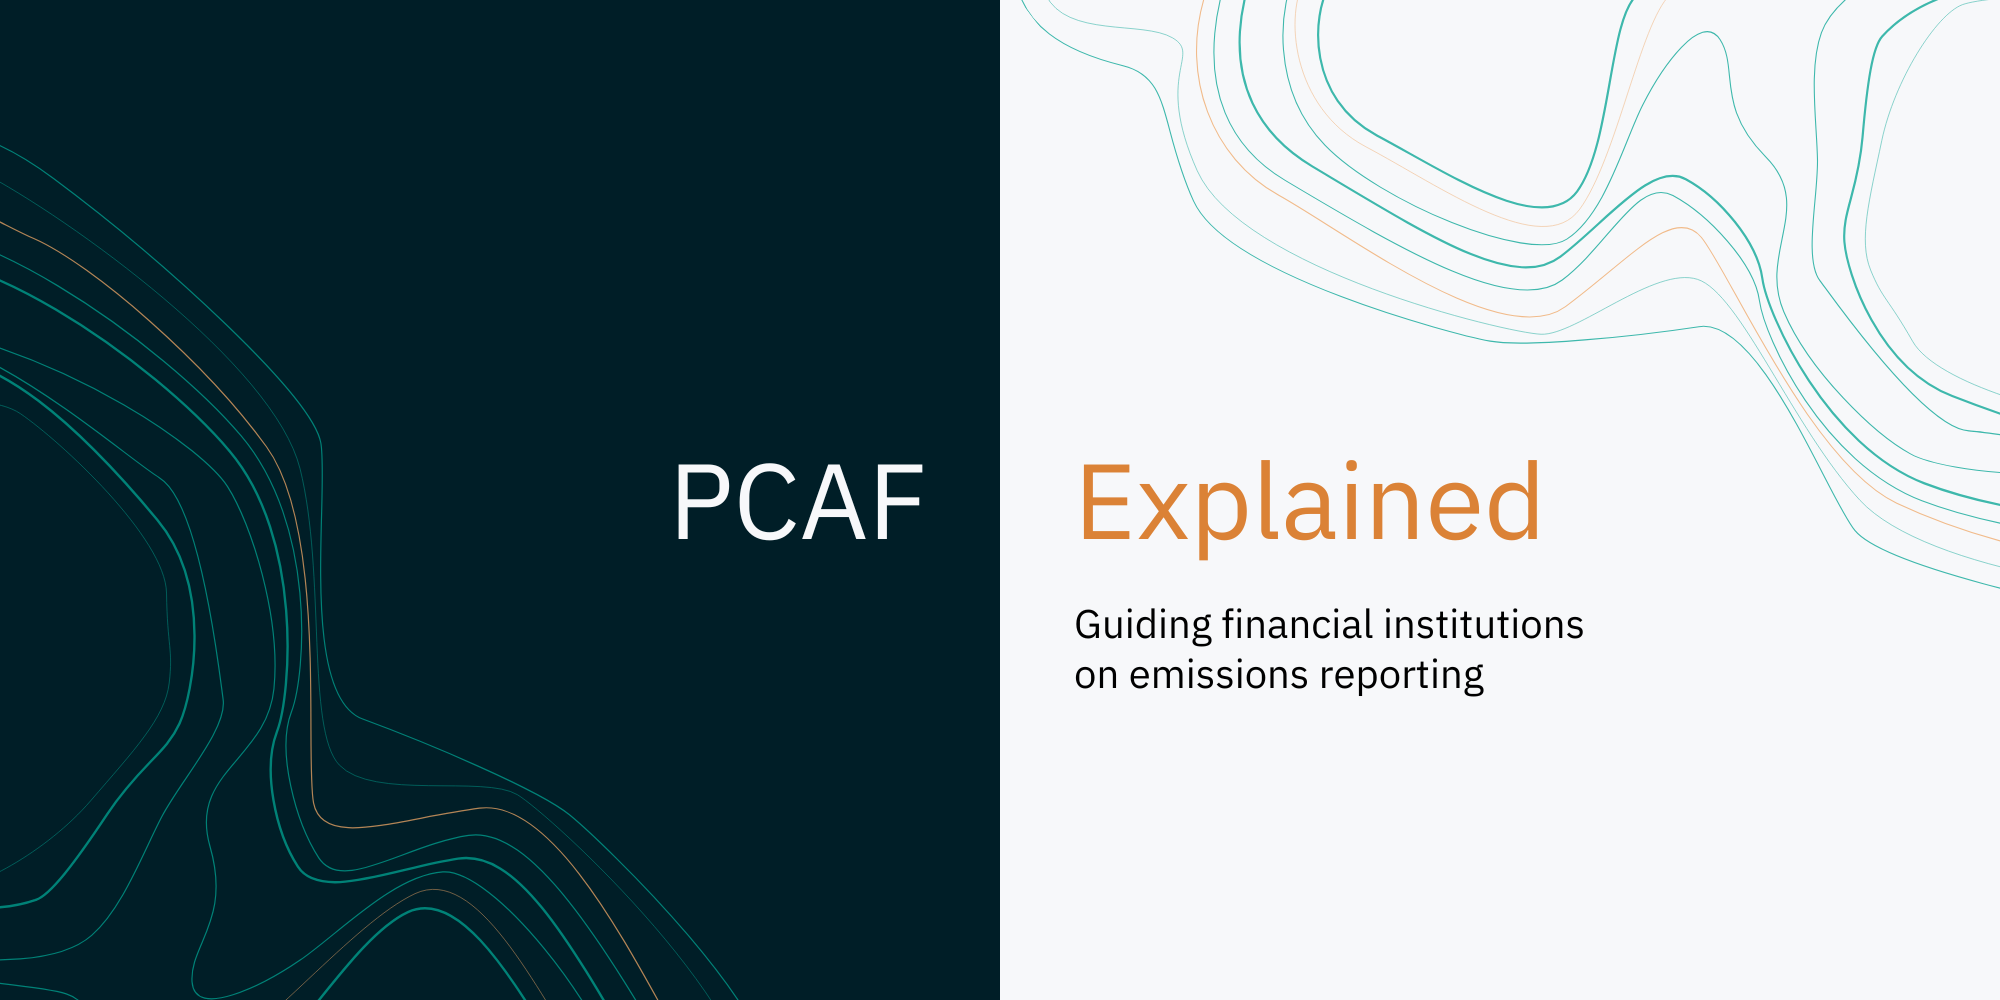 PCAF Explained: Guiding financial institutions on emissions reporting